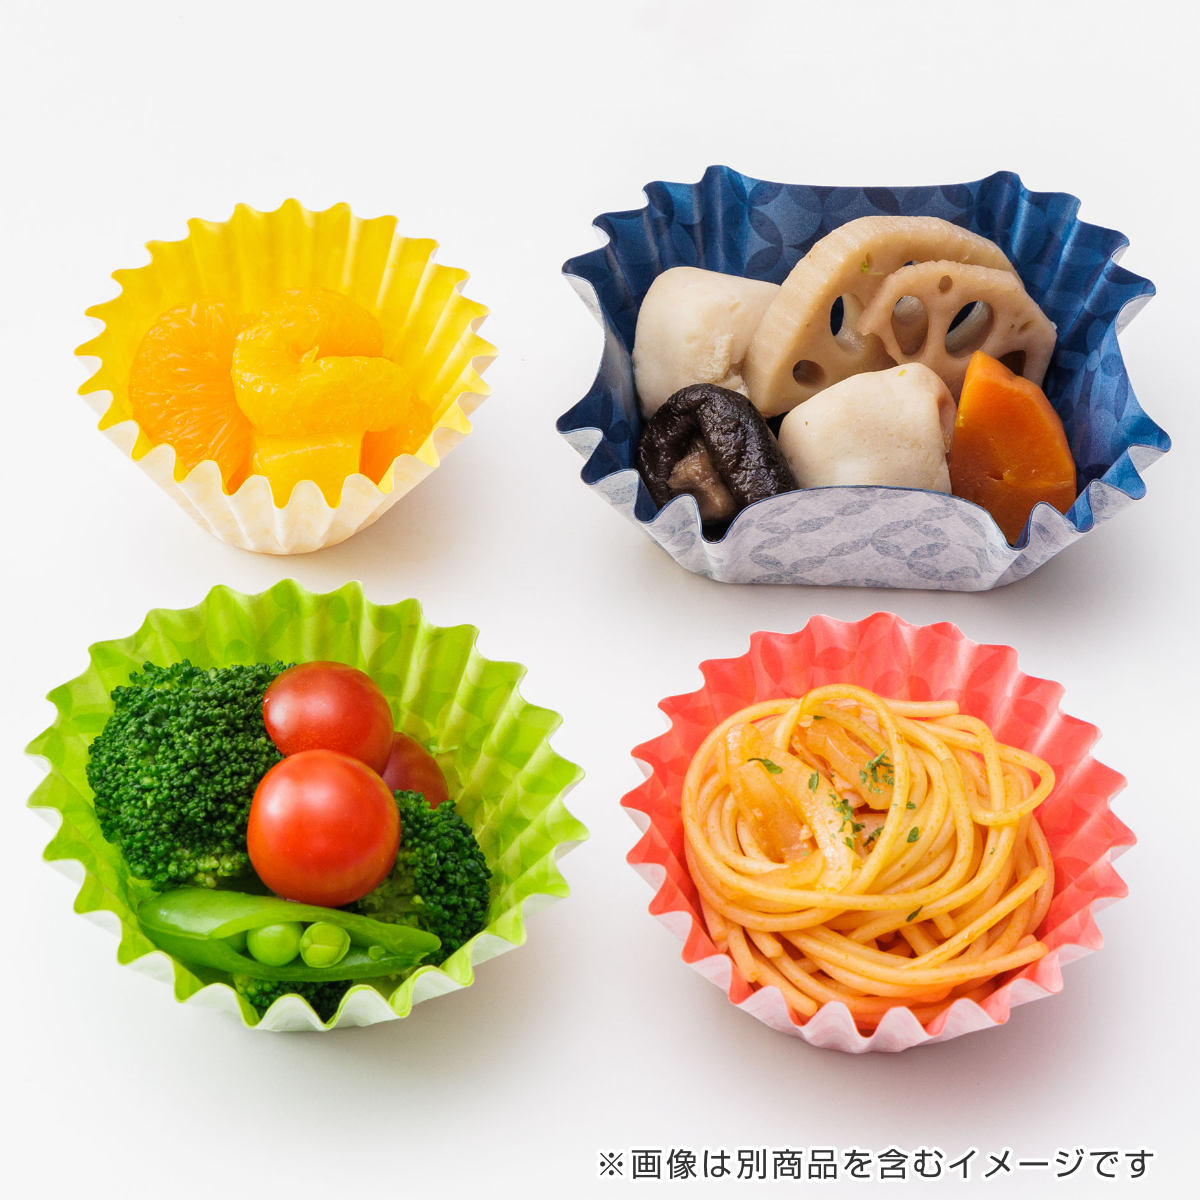  side dish cup 38 sheets entering deep type L size anti-bacterial (.. present cup anti-bacterial processing 38 piece entering side dish inserting . present child made in Japan )